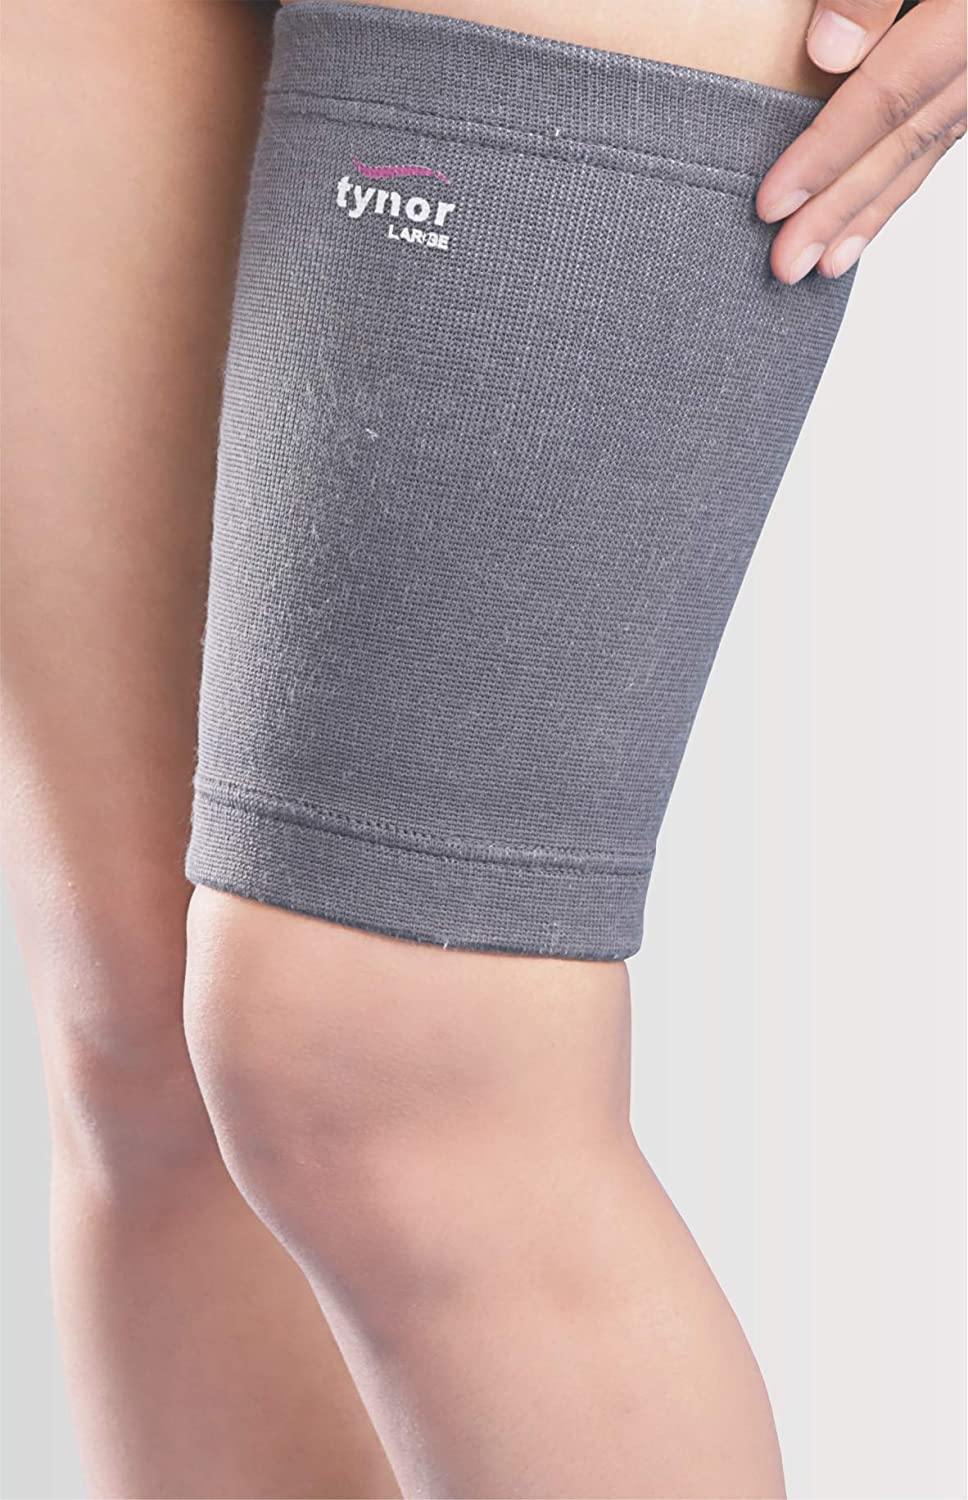 Tynor Thigh Support D-14-Health & Personal Care-dealsplant